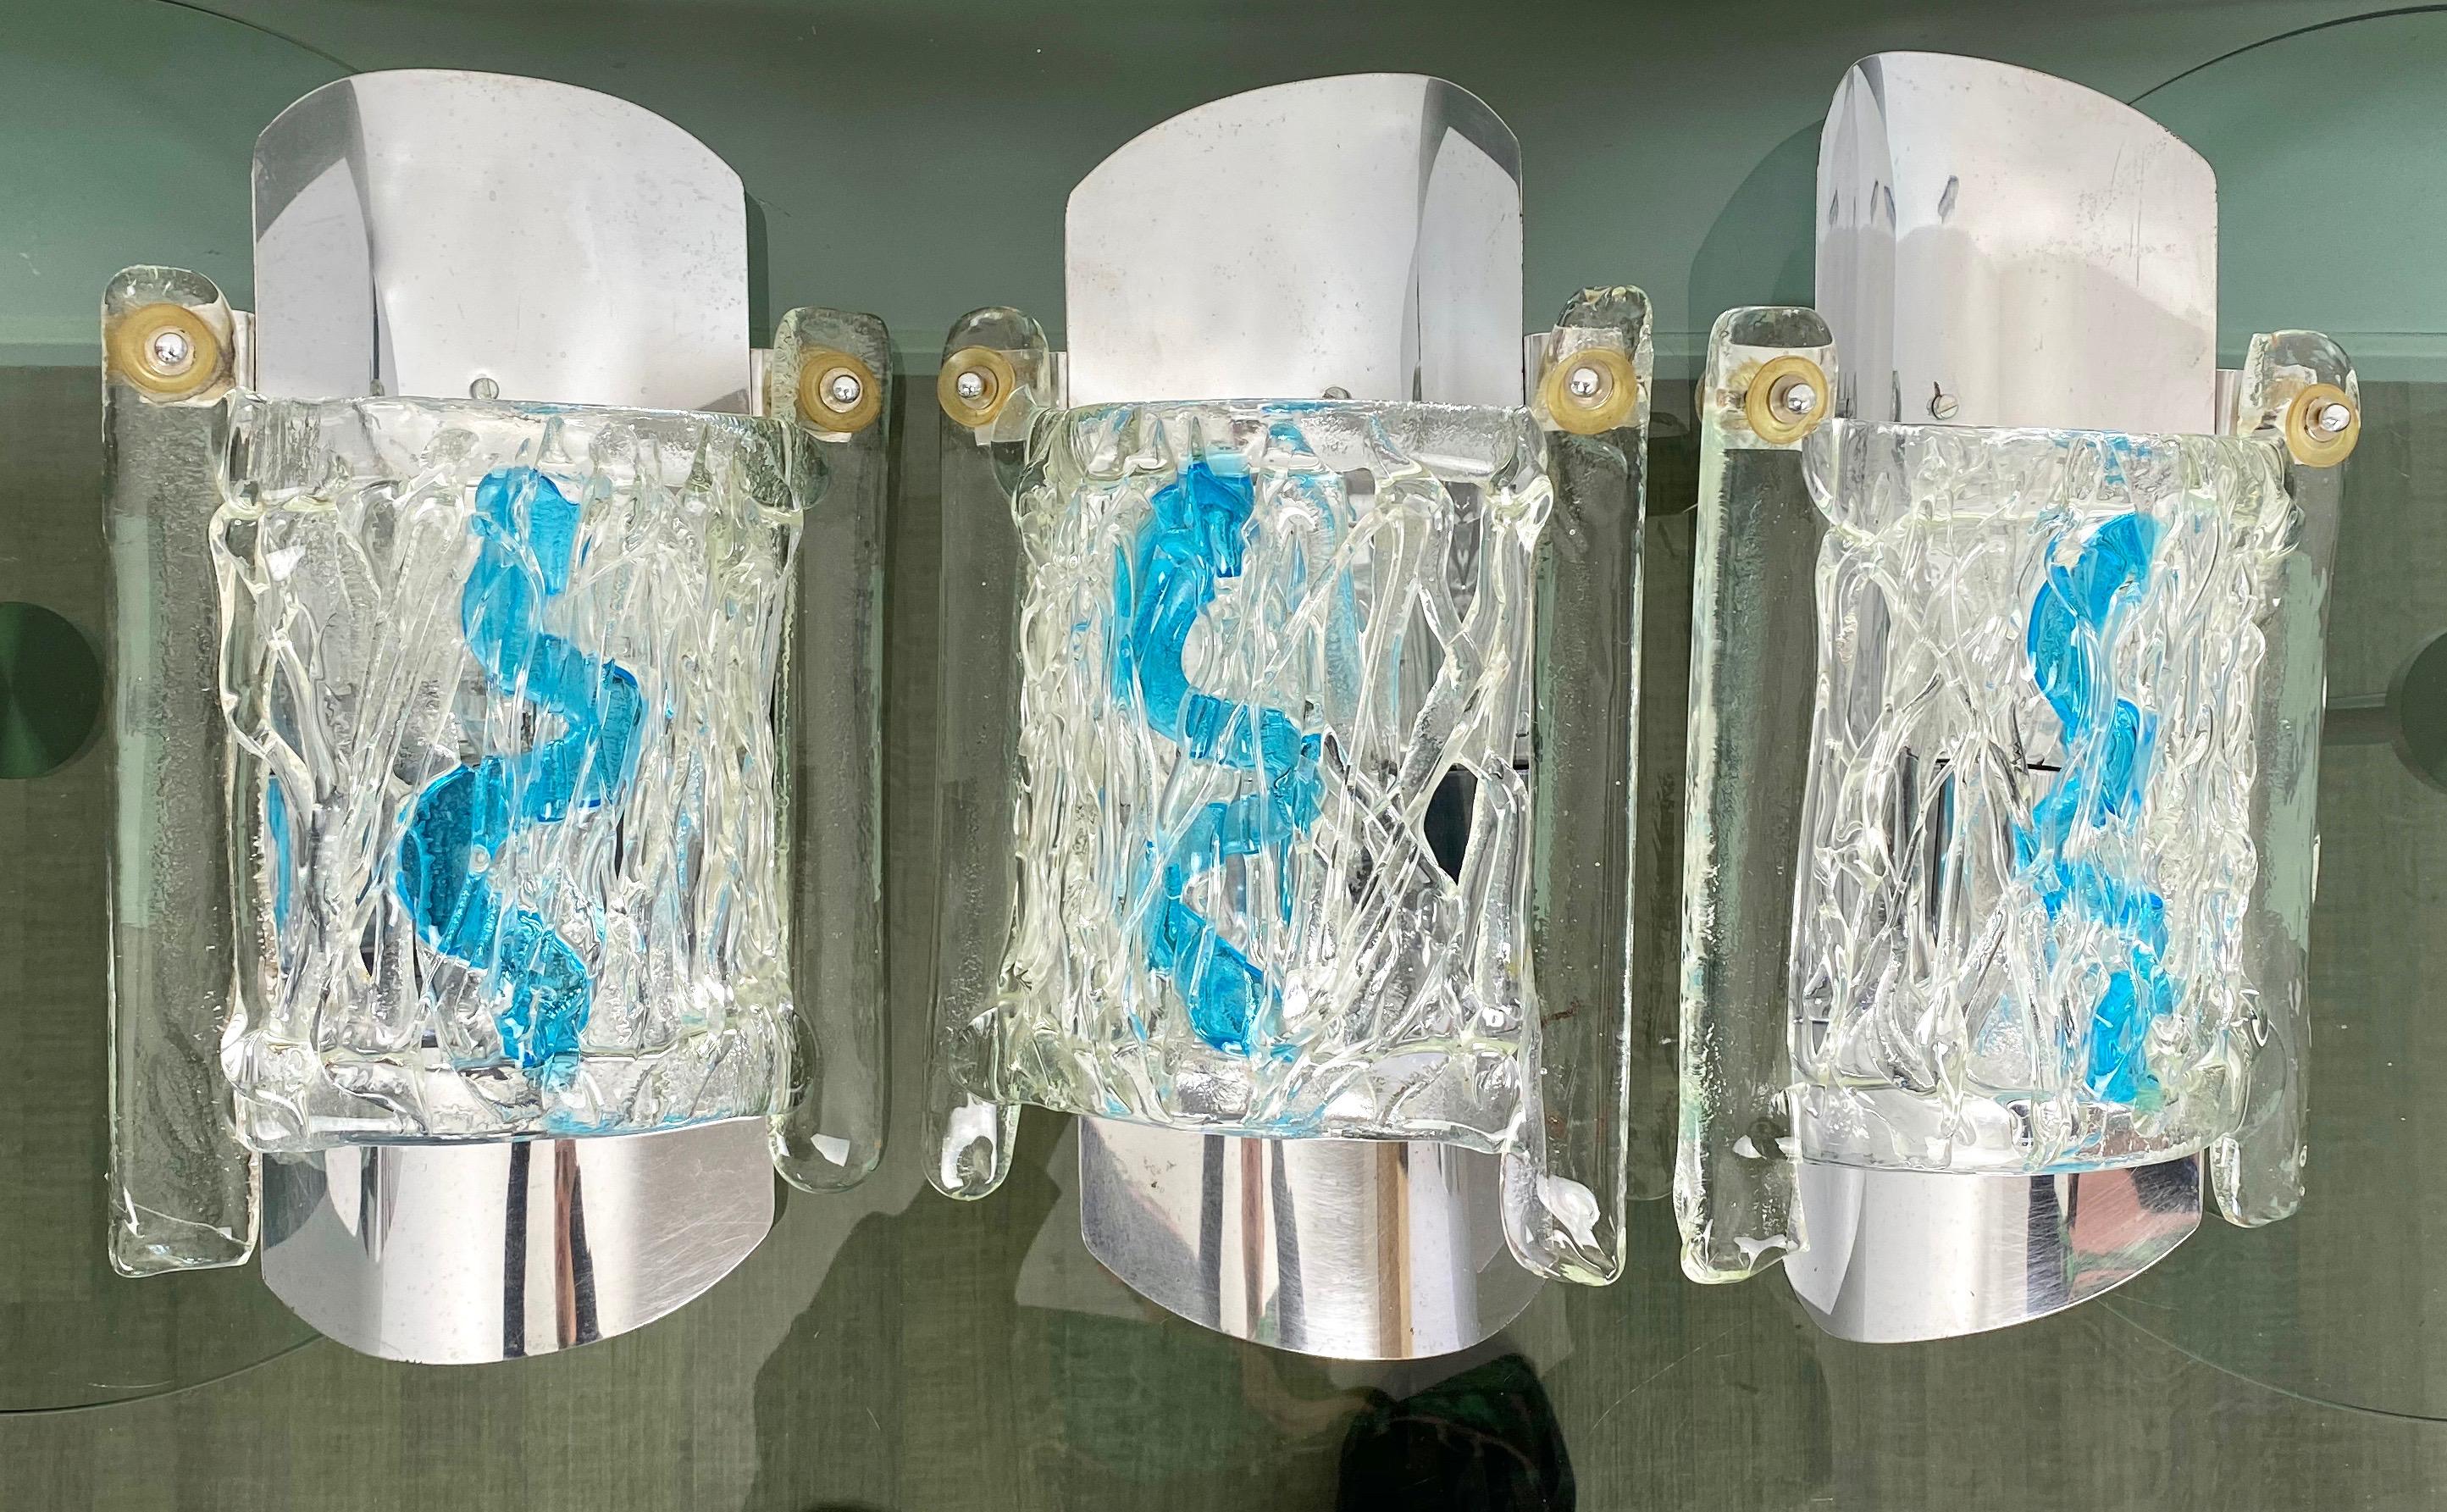 Mid-Century Modern Set of 3 Wall Lamp Sconces Chrome and Murano Glass Blue by Mazzega, Italy, 1970s For Sale